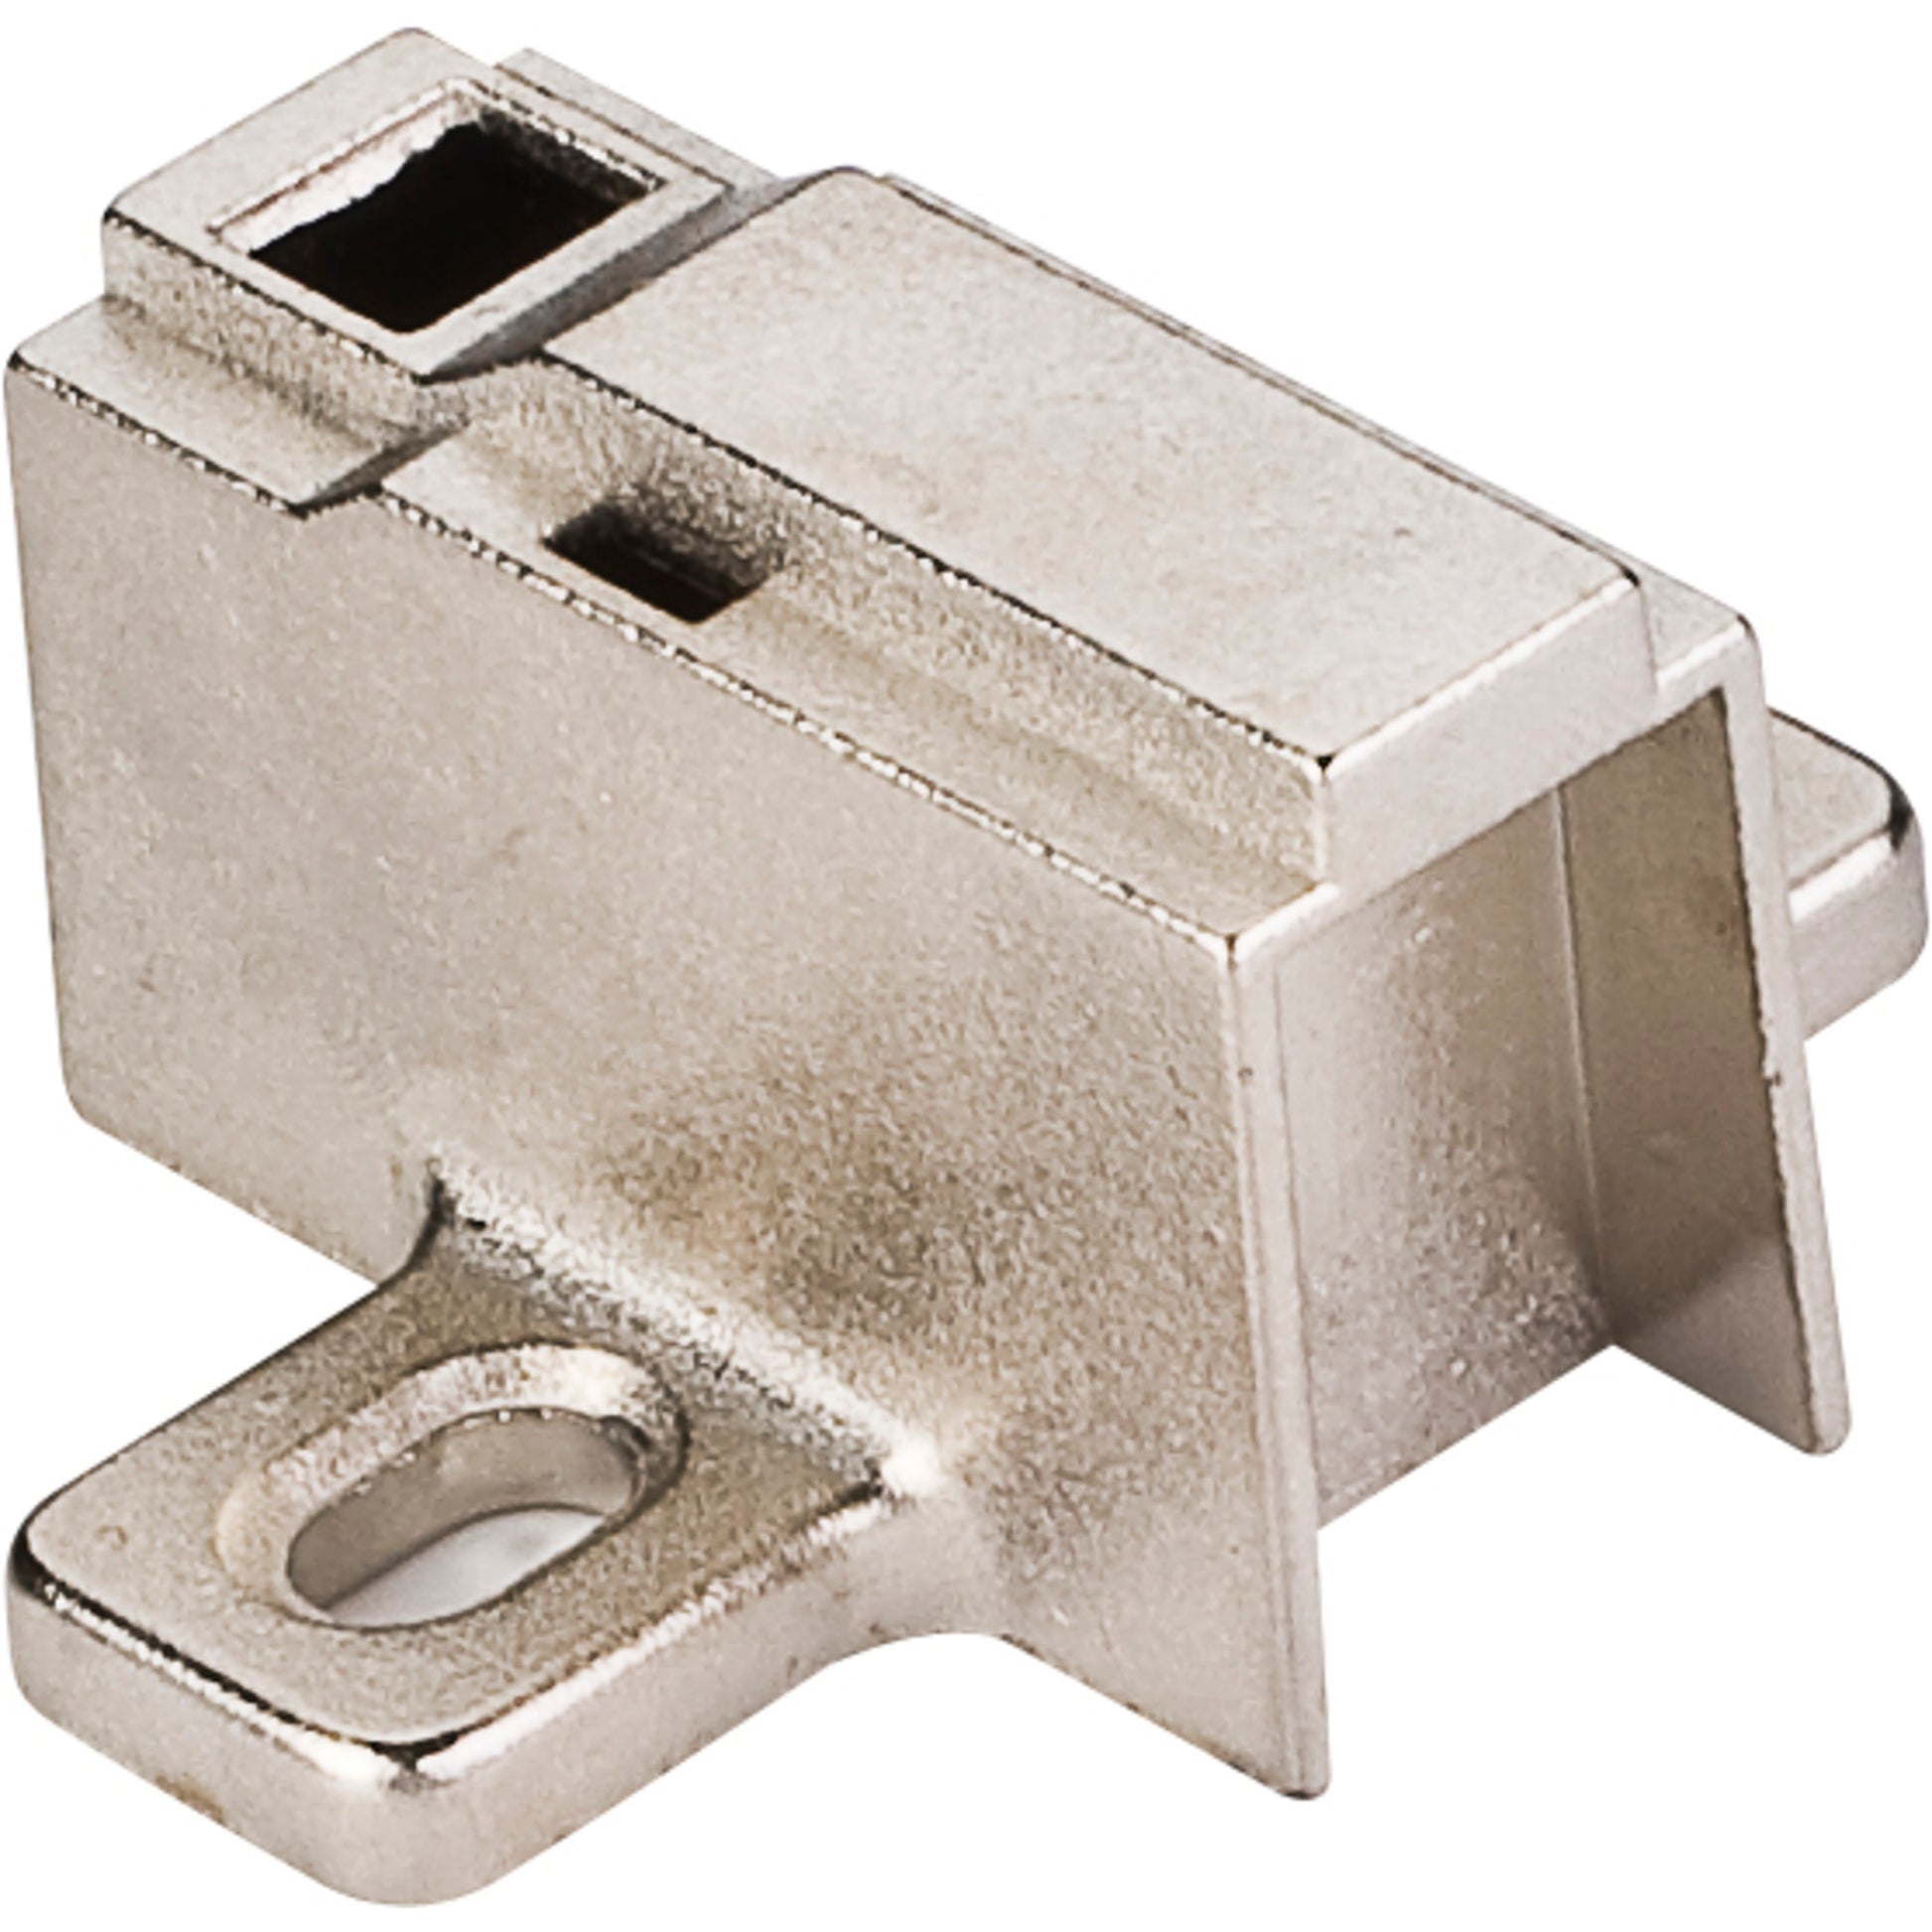 HARDWARE RESOURCES 400.0P18.05 Heavy Duty 18 mm Non-Cam Adjustable Zinc Die Cast Plate for 500 Series Euro Hinges